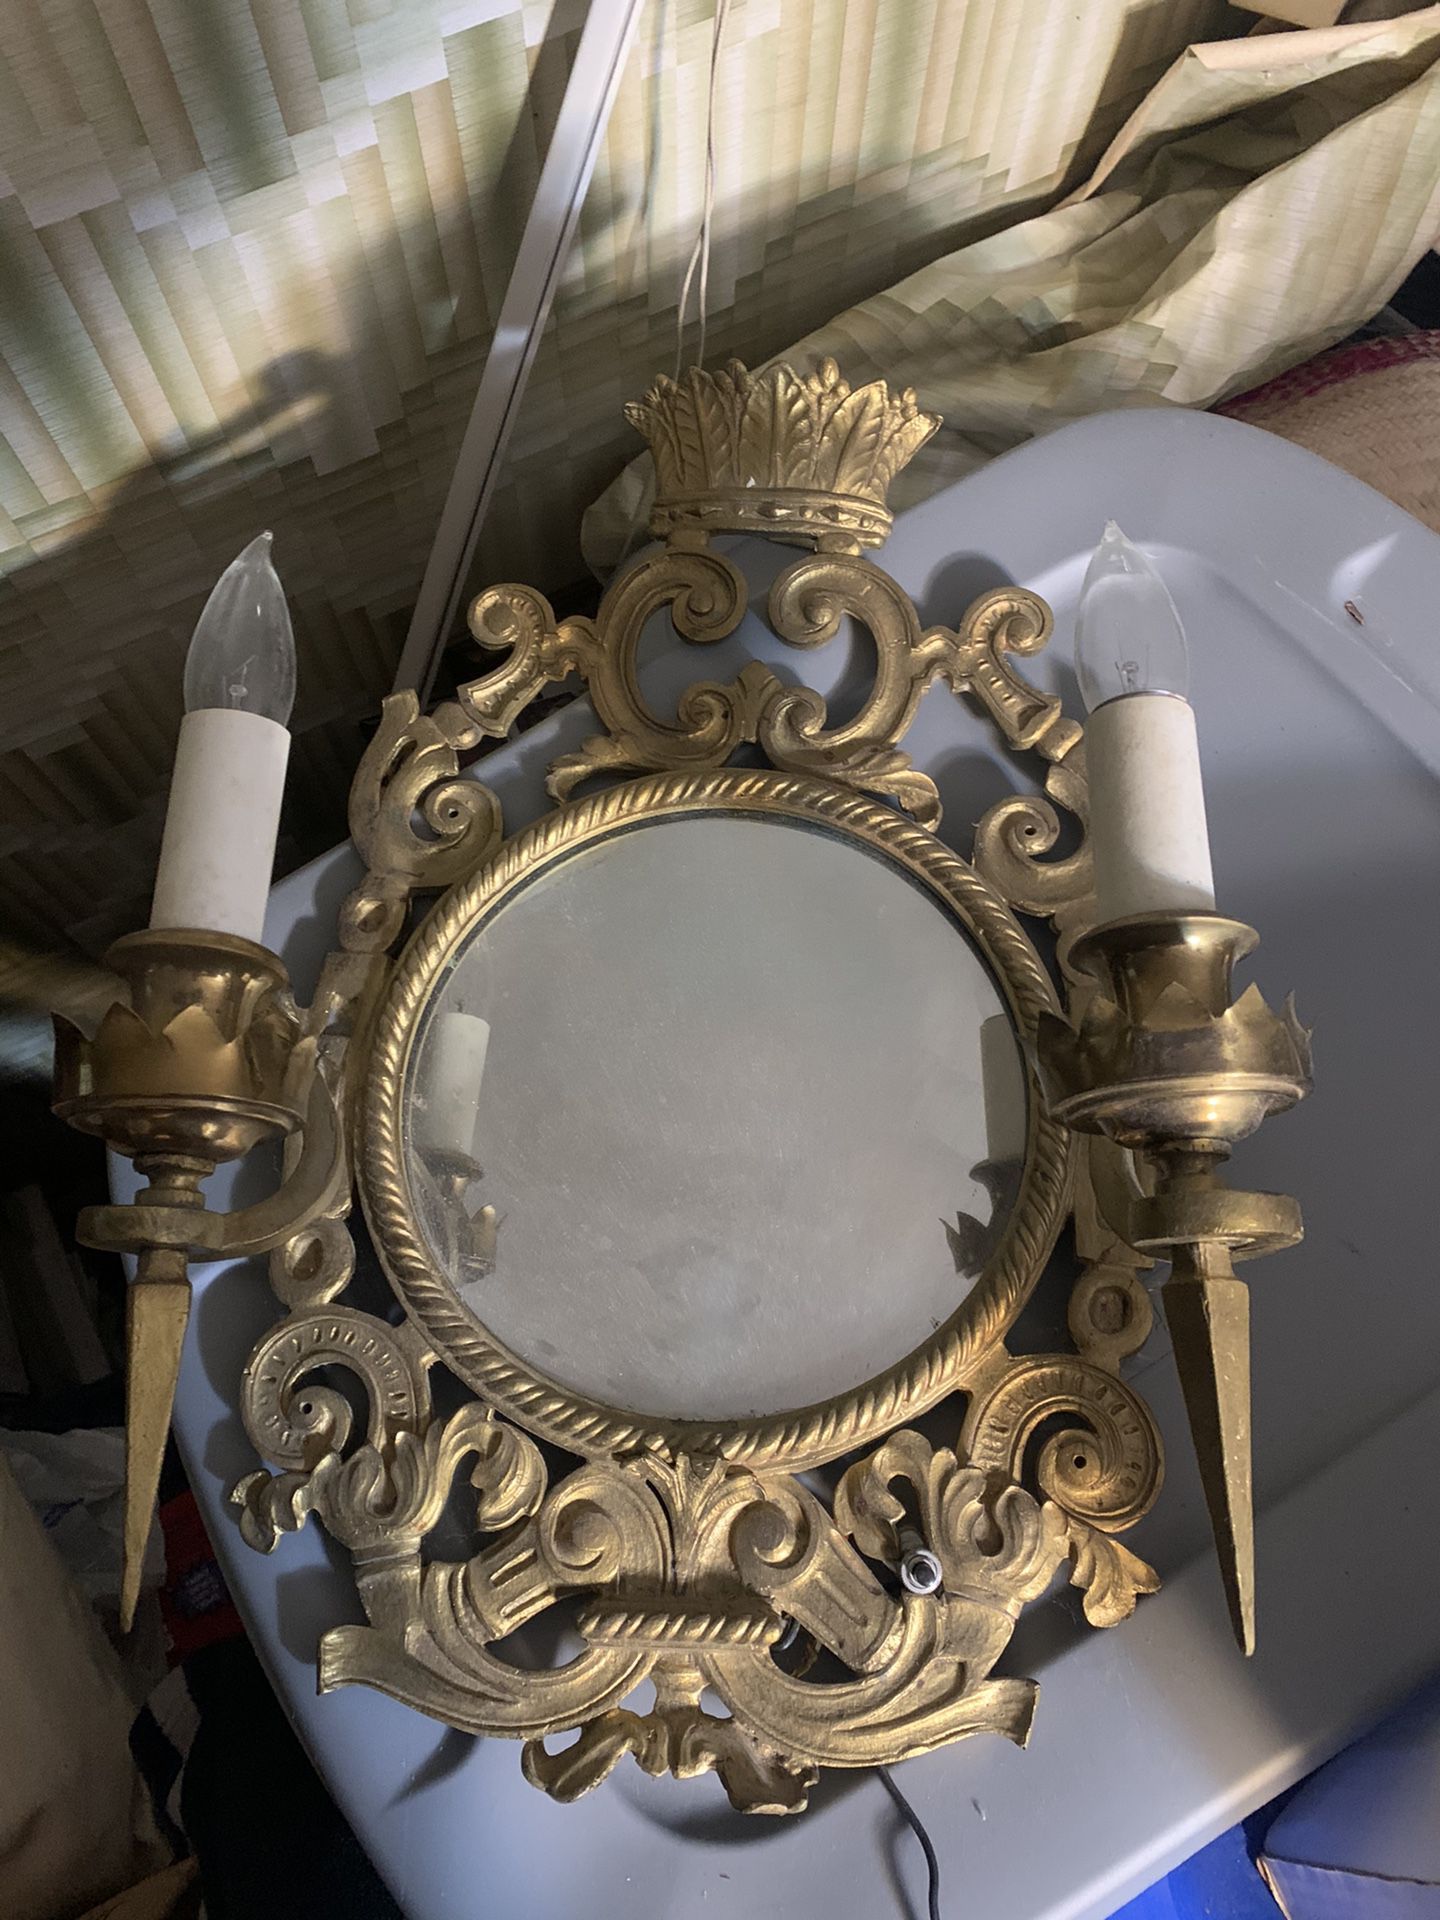 Antique Sconce Lights & Mirror, Gilded